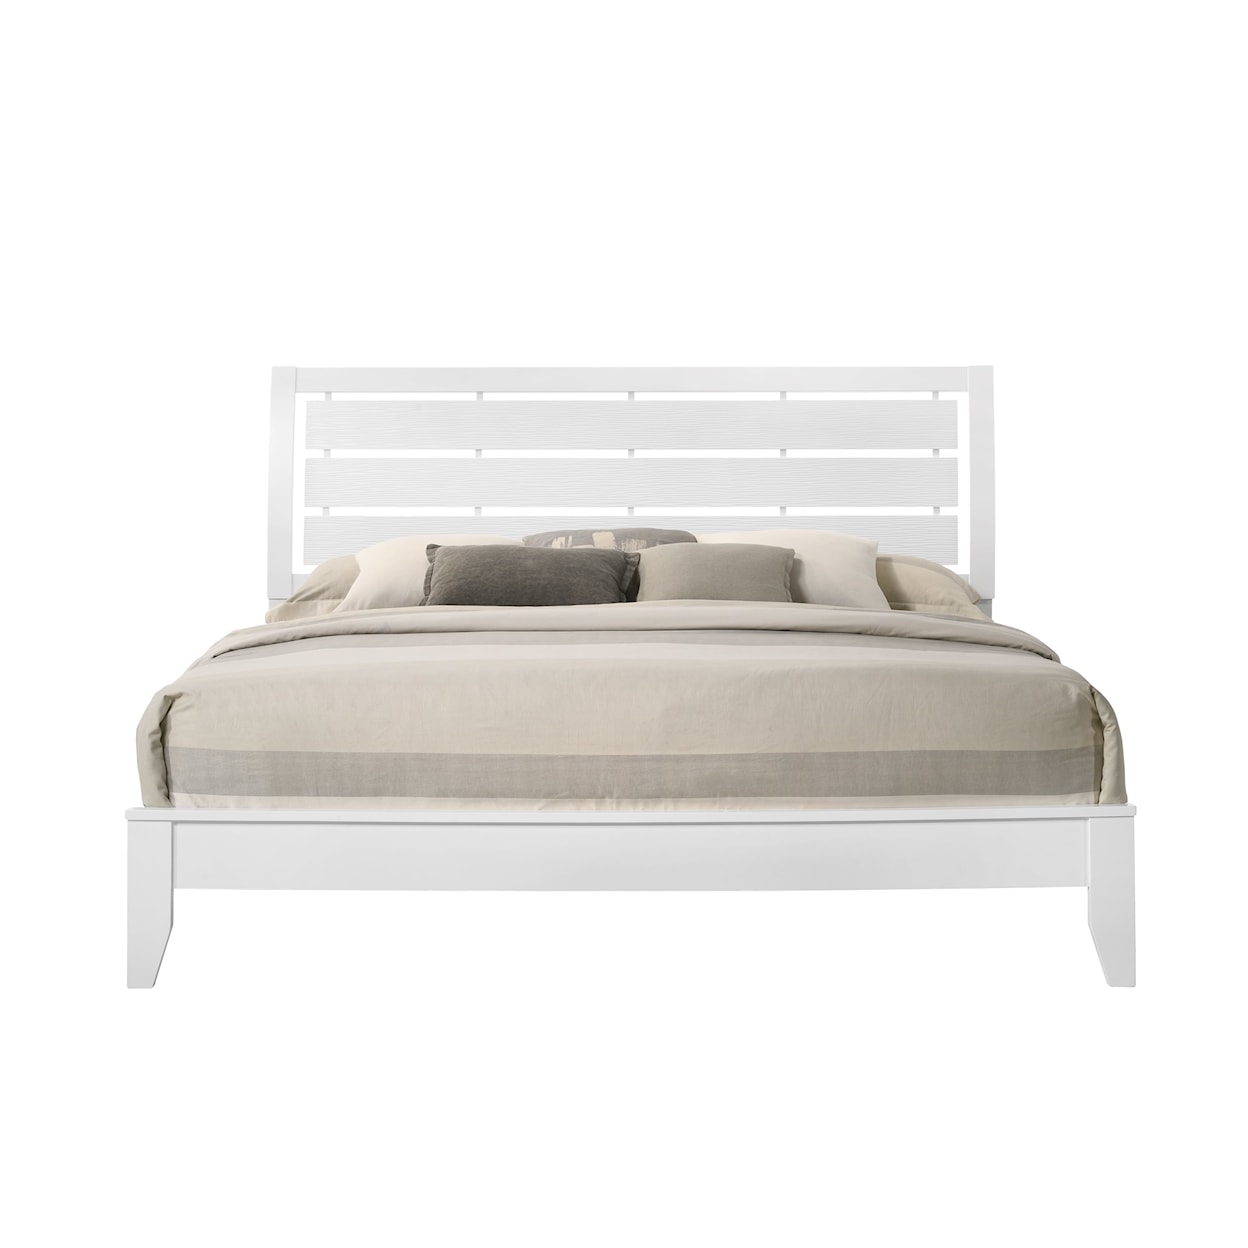 Crown Mark Evelyn EVELYN WHITE KING BED |